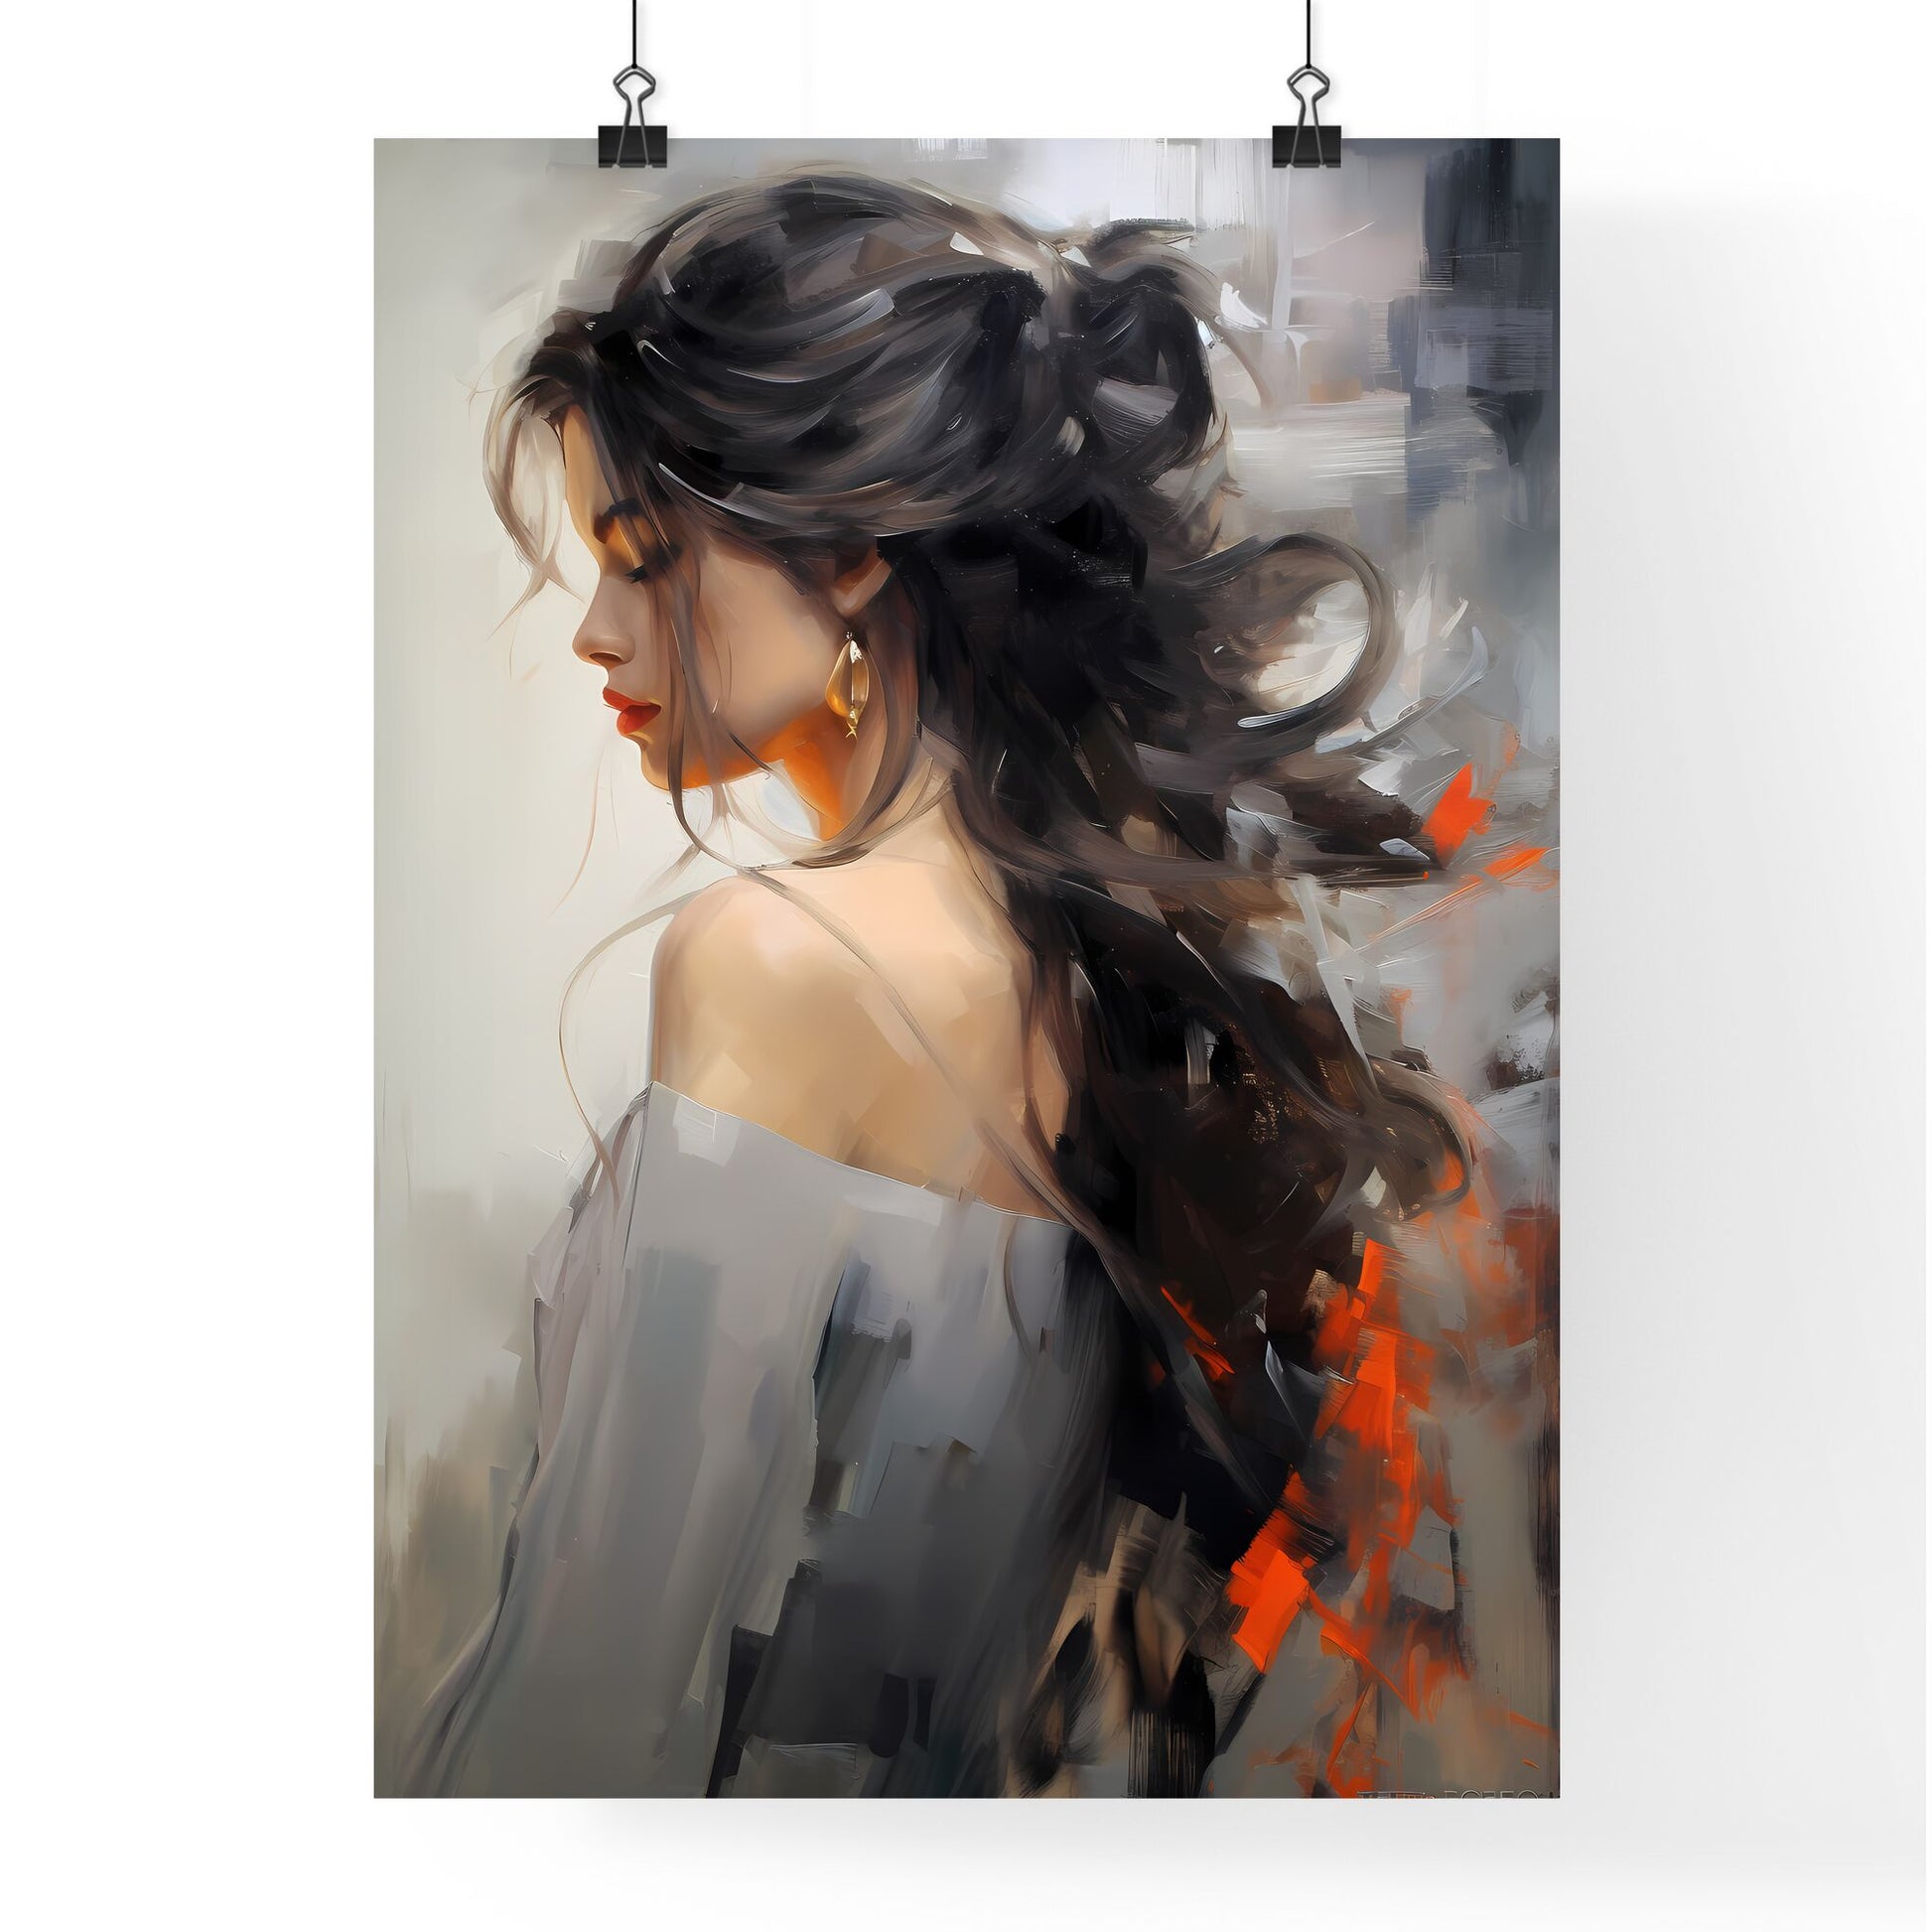 Painting Of A Woman With Long Hair Art Print Default Title